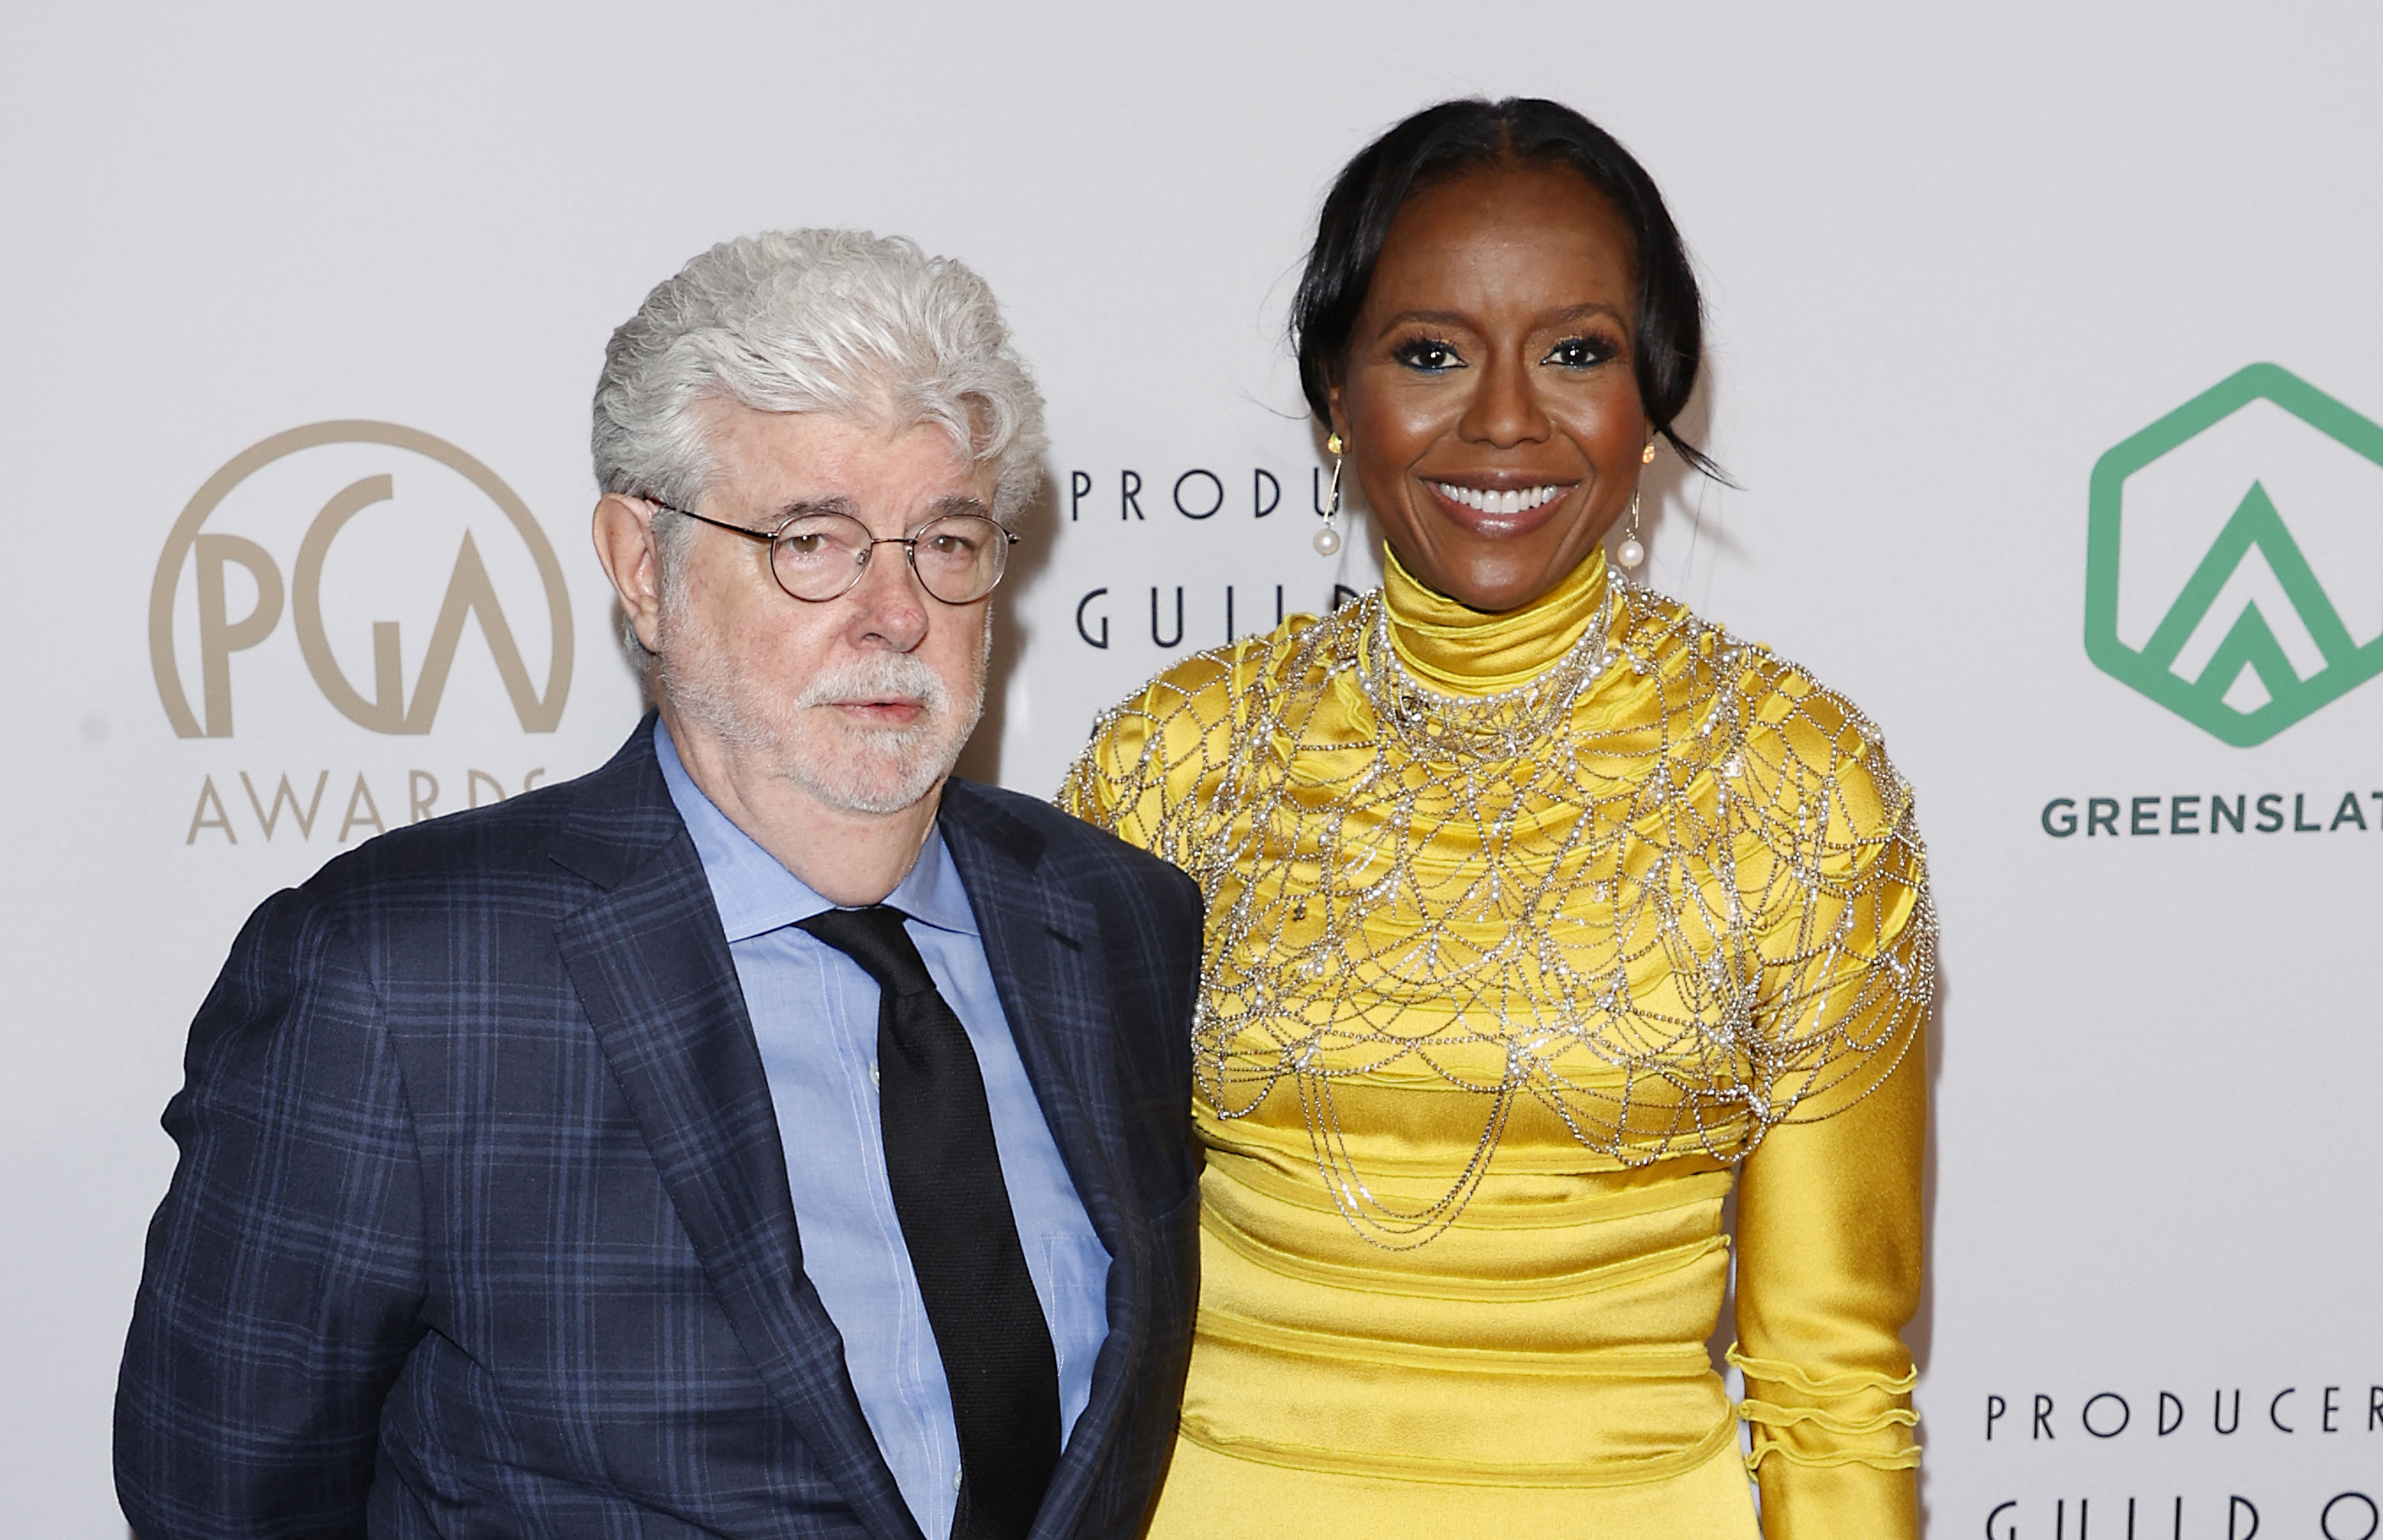 George Lucas and his wife Mellody Hobson arrive for the 33rd Annual Producers Guild Awards